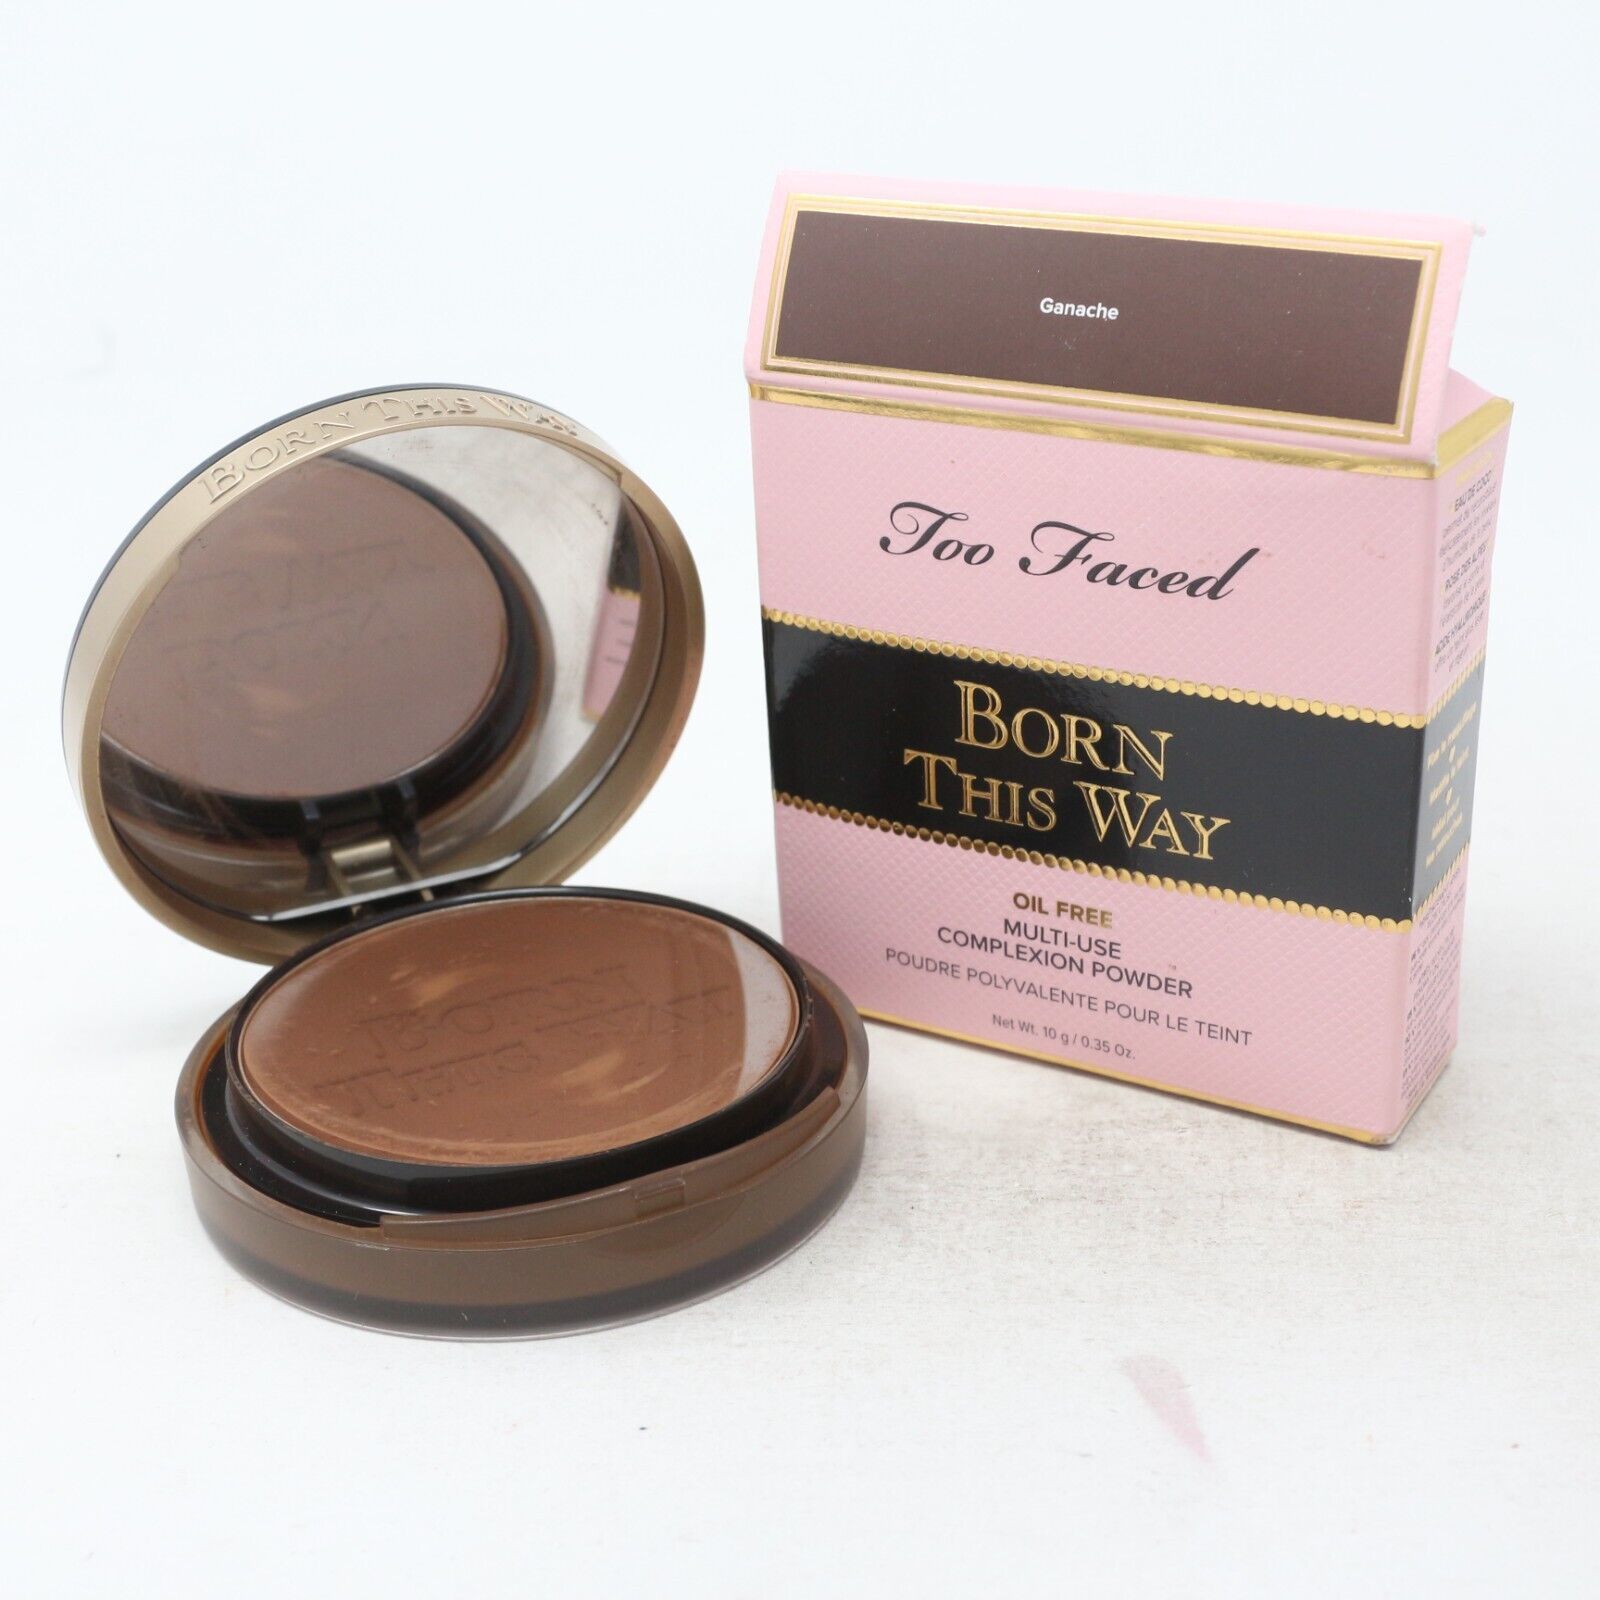 Too Faced Born This Way Oil Free Powder  0.35oz/10g New With Box - $23.75 - $24.74